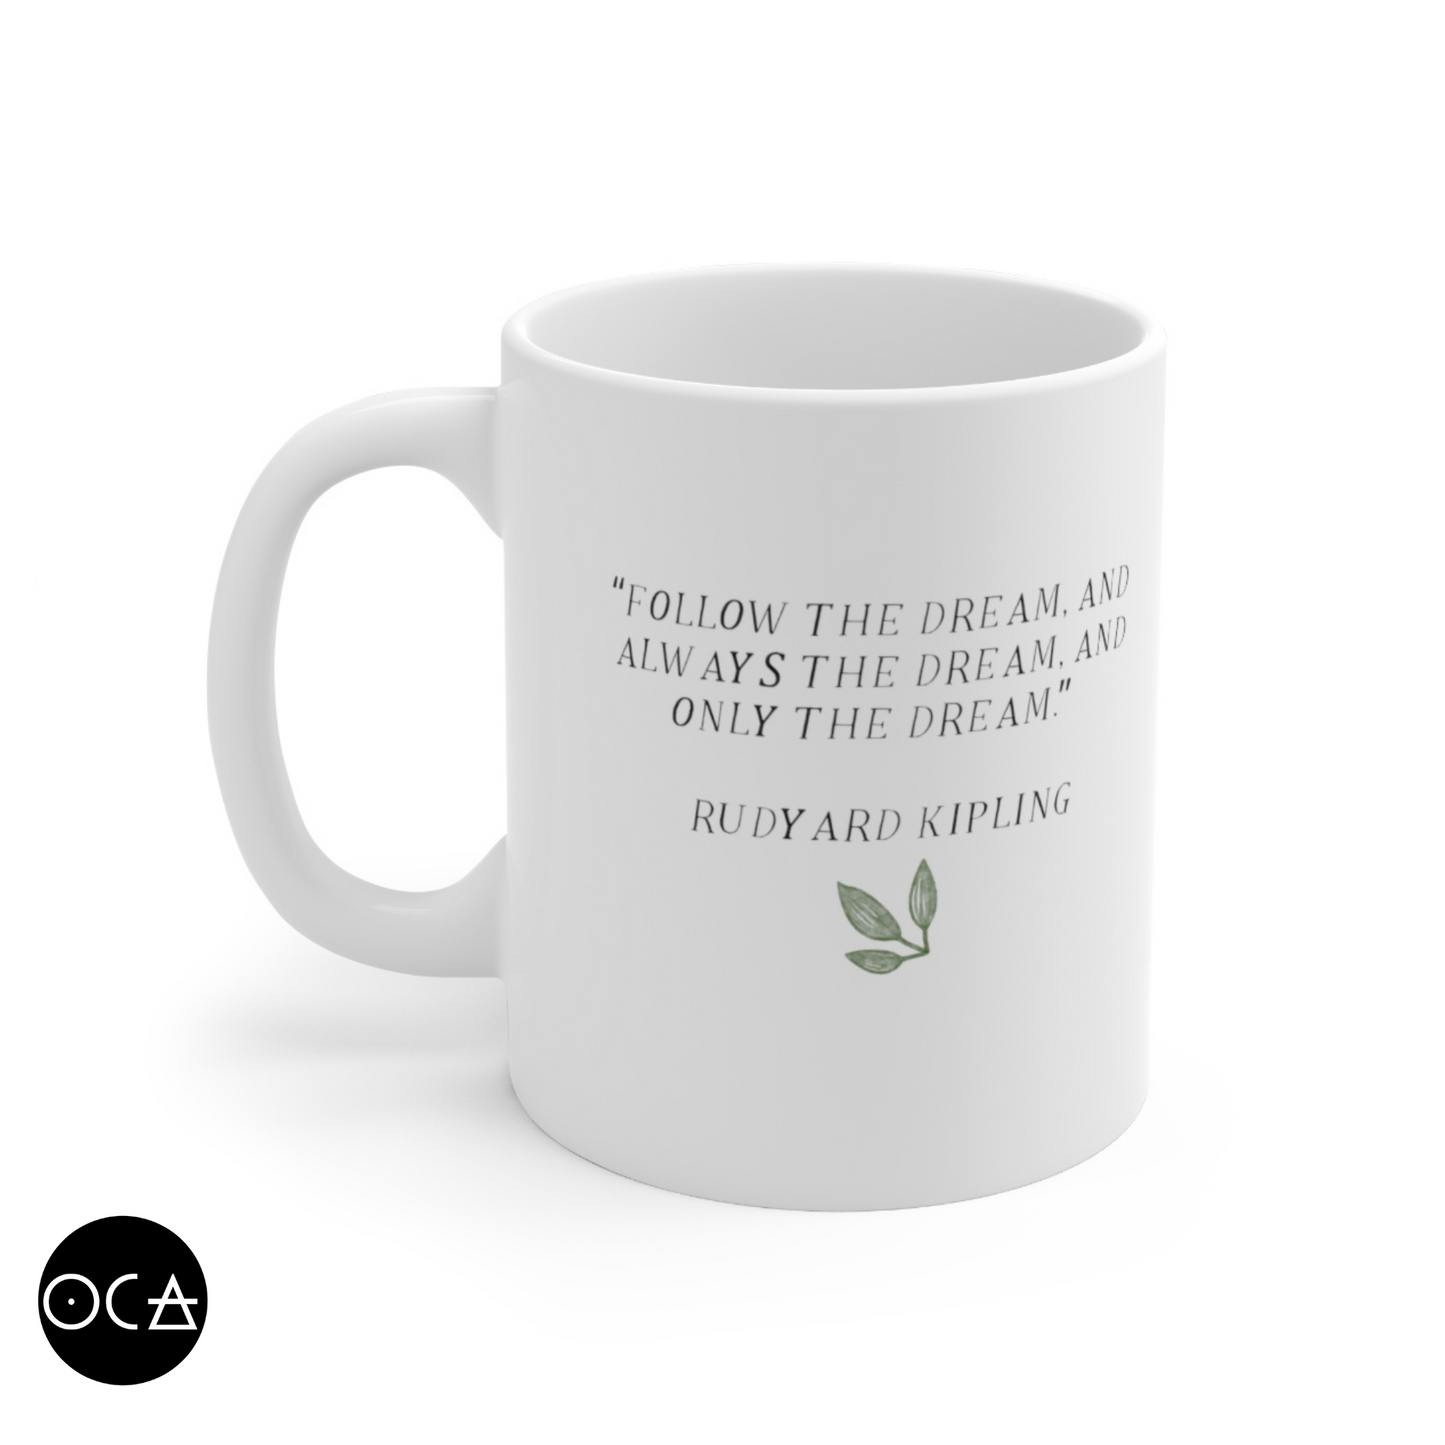 Rudyard Kipling Mug (Doublesided/2 Color Options) Herbteller Lucky Mugs | Gifts for Writers, Readers, Tellers, and Taleswappers